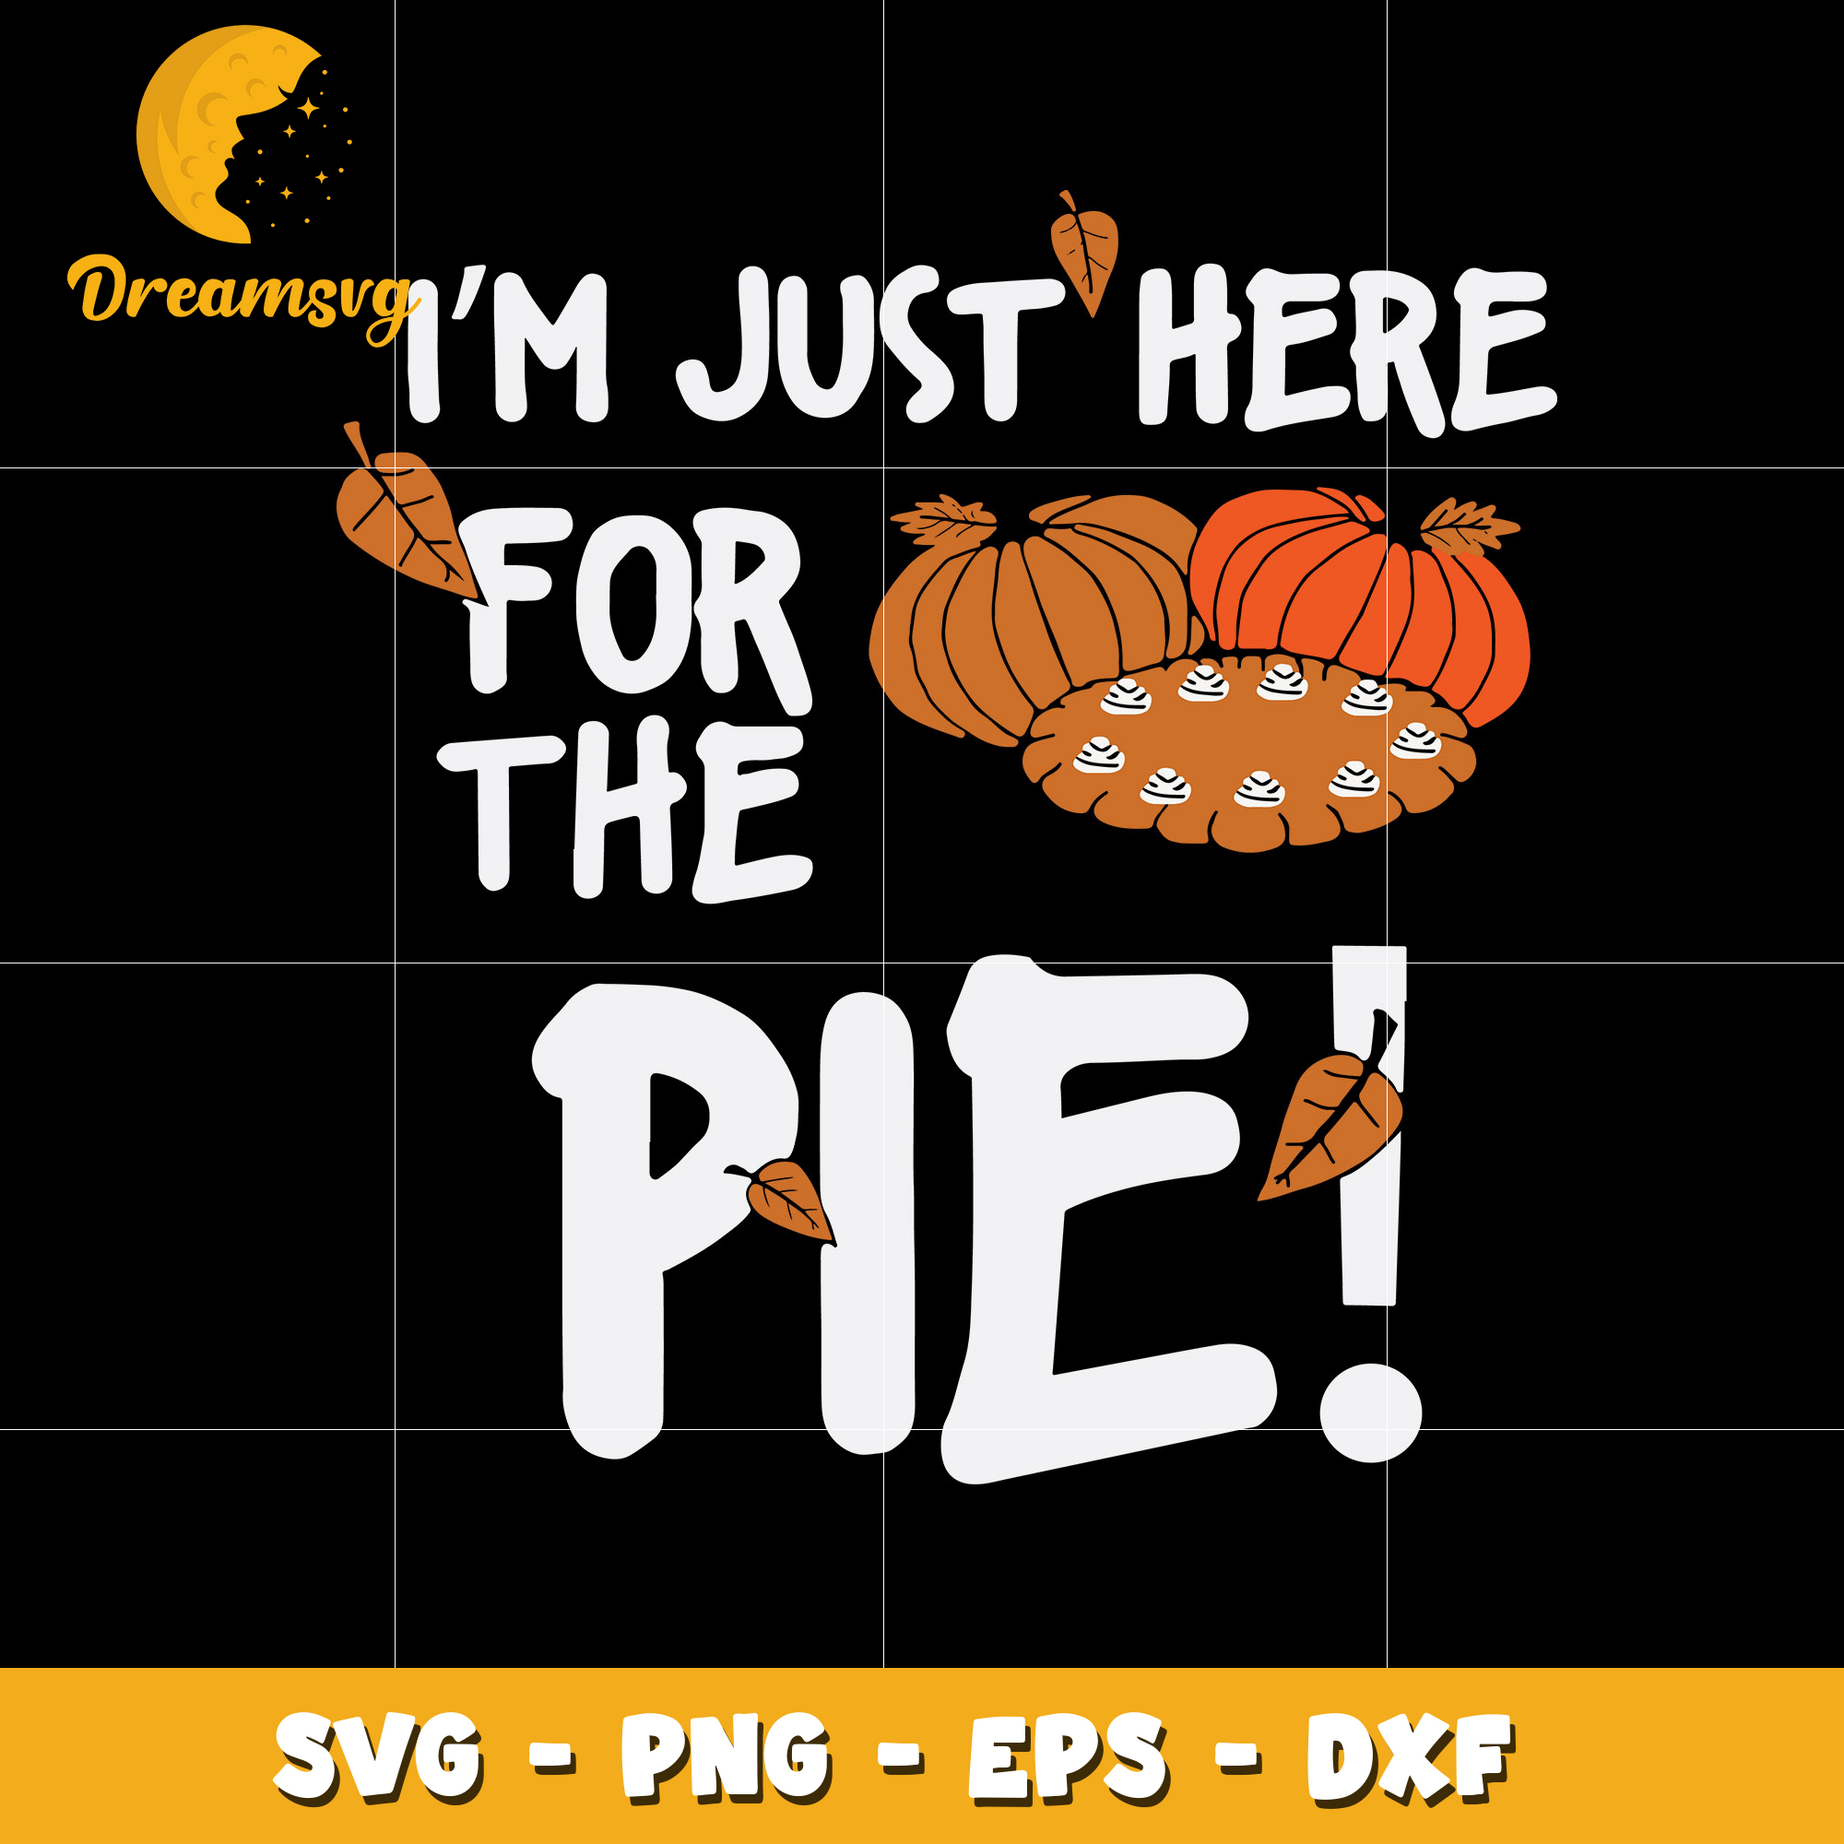 I’m Just Here For The Pie! Svg